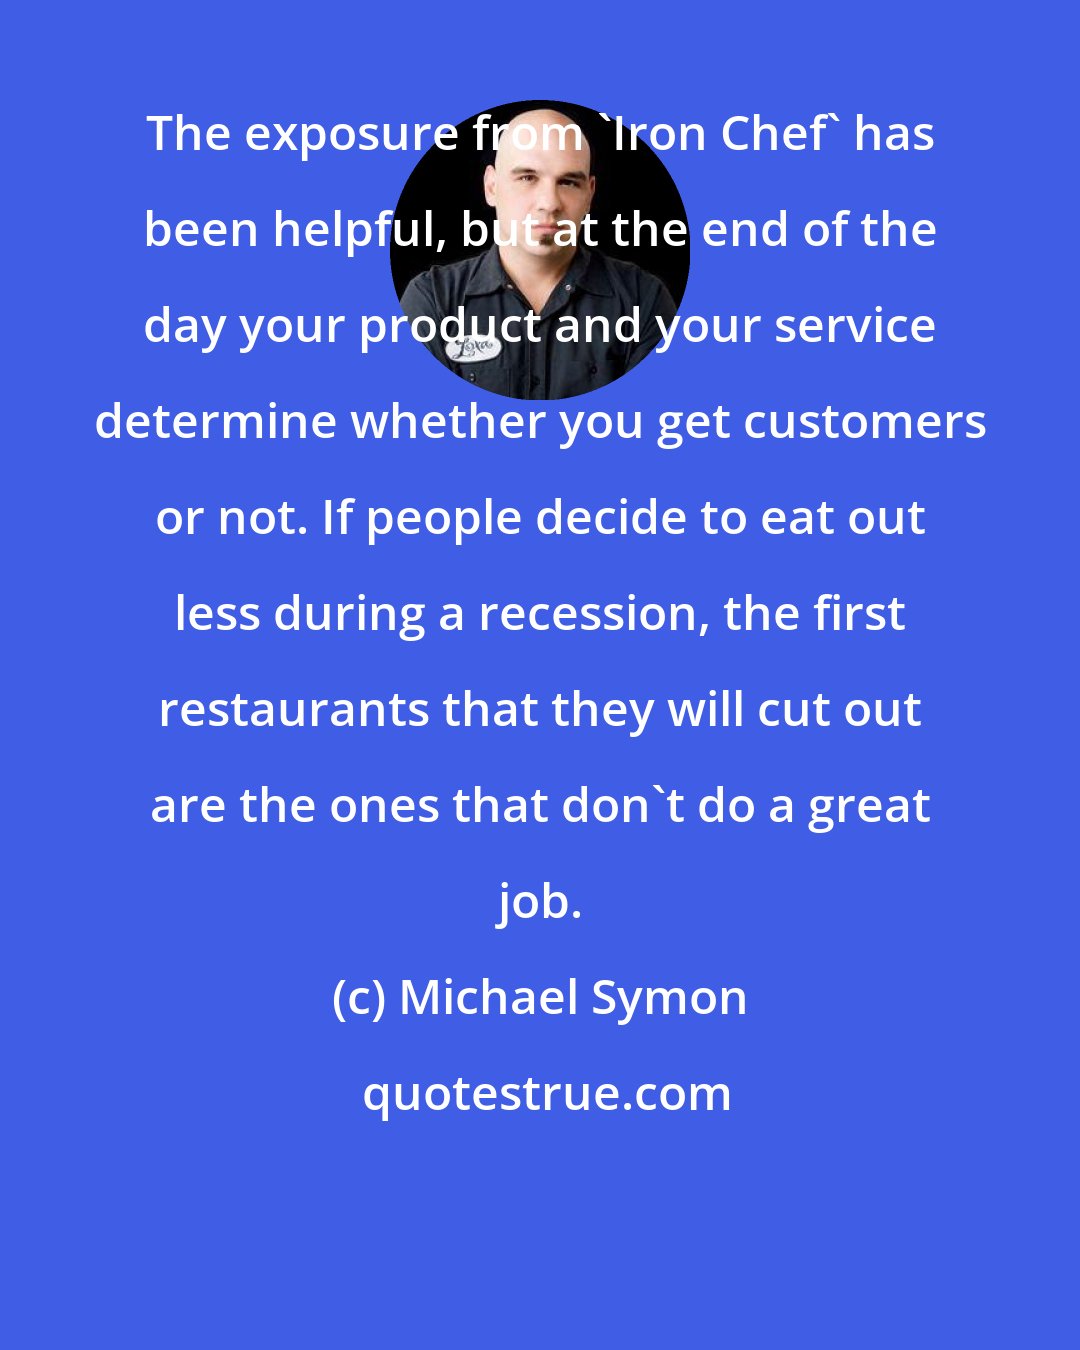 Michael Symon: The exposure from 'Iron Chef' has been helpful, but at the end of the day your product and your service determine whether you get customers or not. If people decide to eat out less during a recession, the first restaurants that they will cut out are the ones that don't do a great job.